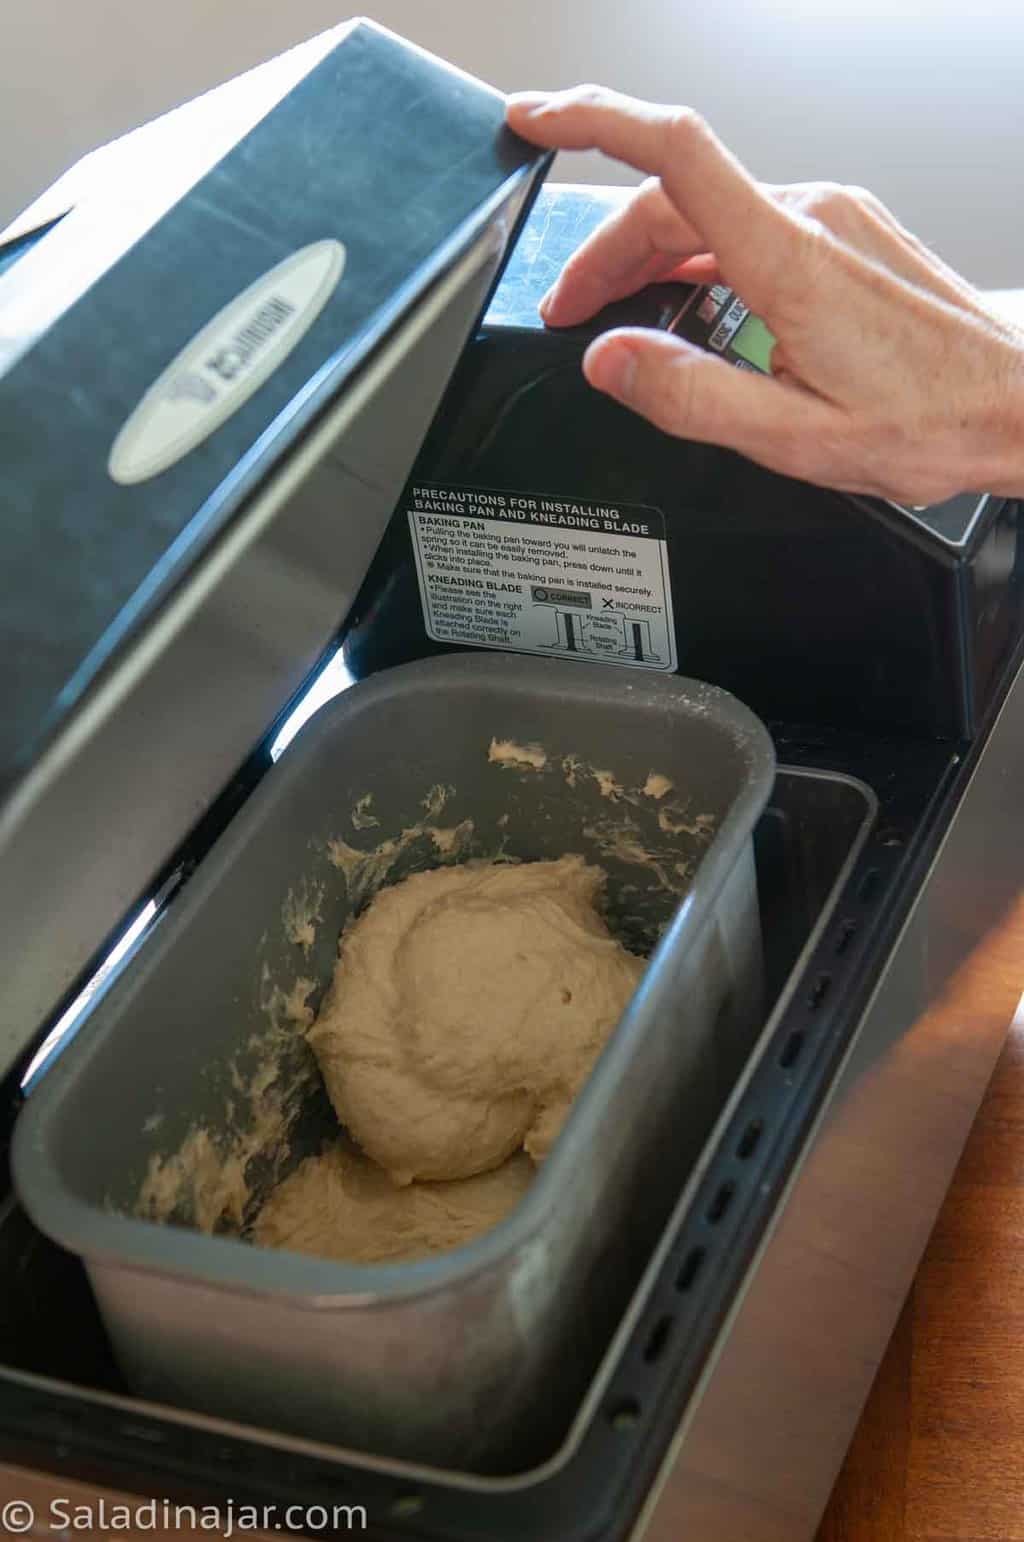 judging cpnsistency of dough in a bread machine